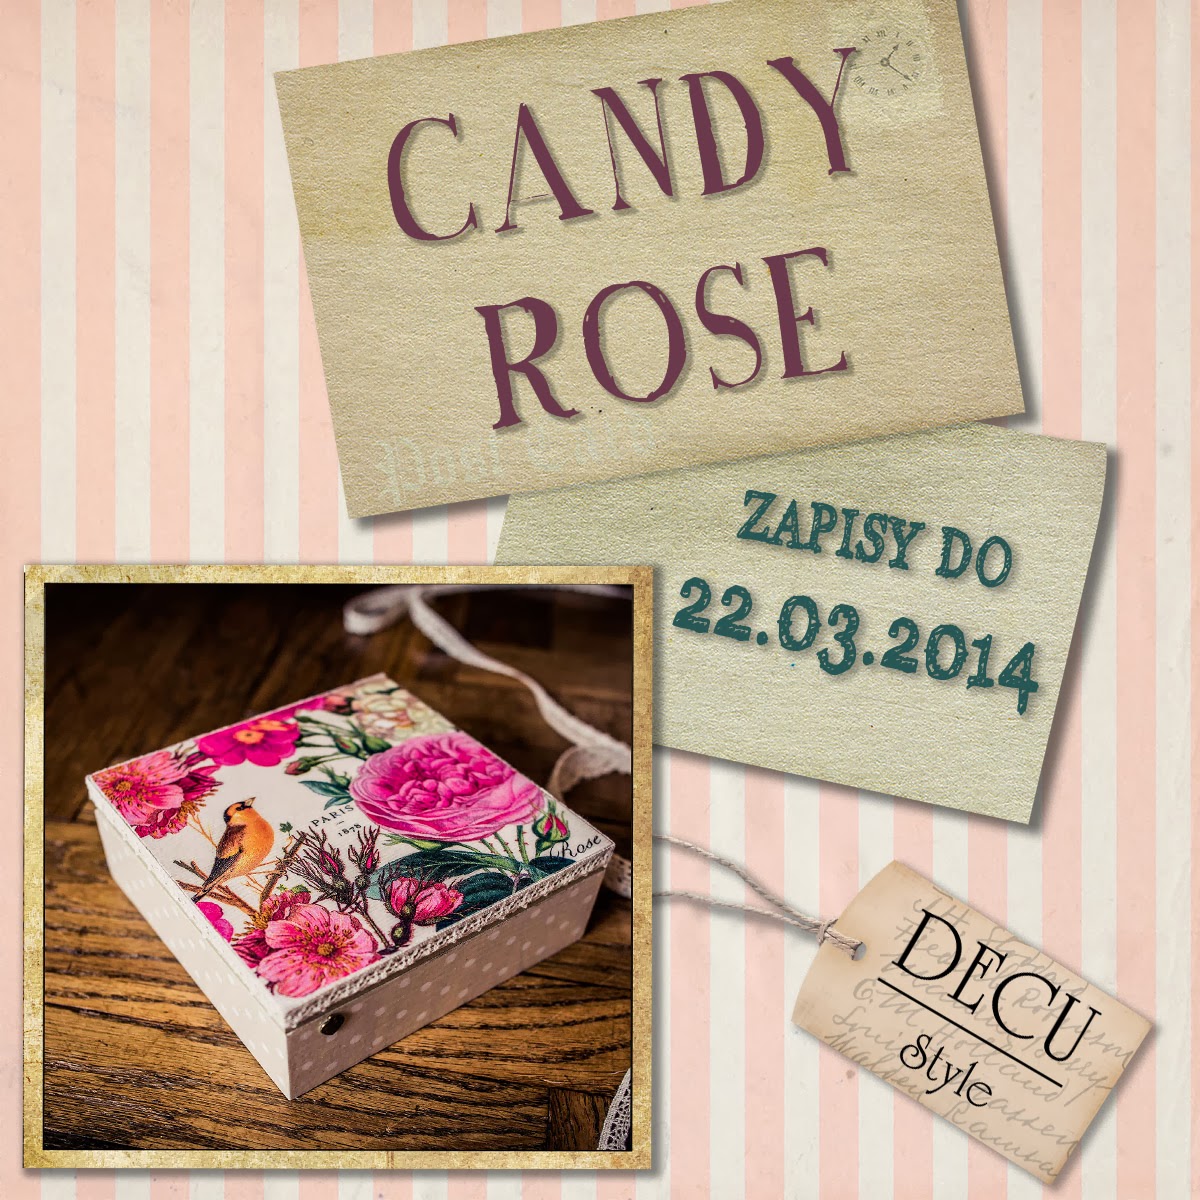 Candy do 22.03.2014